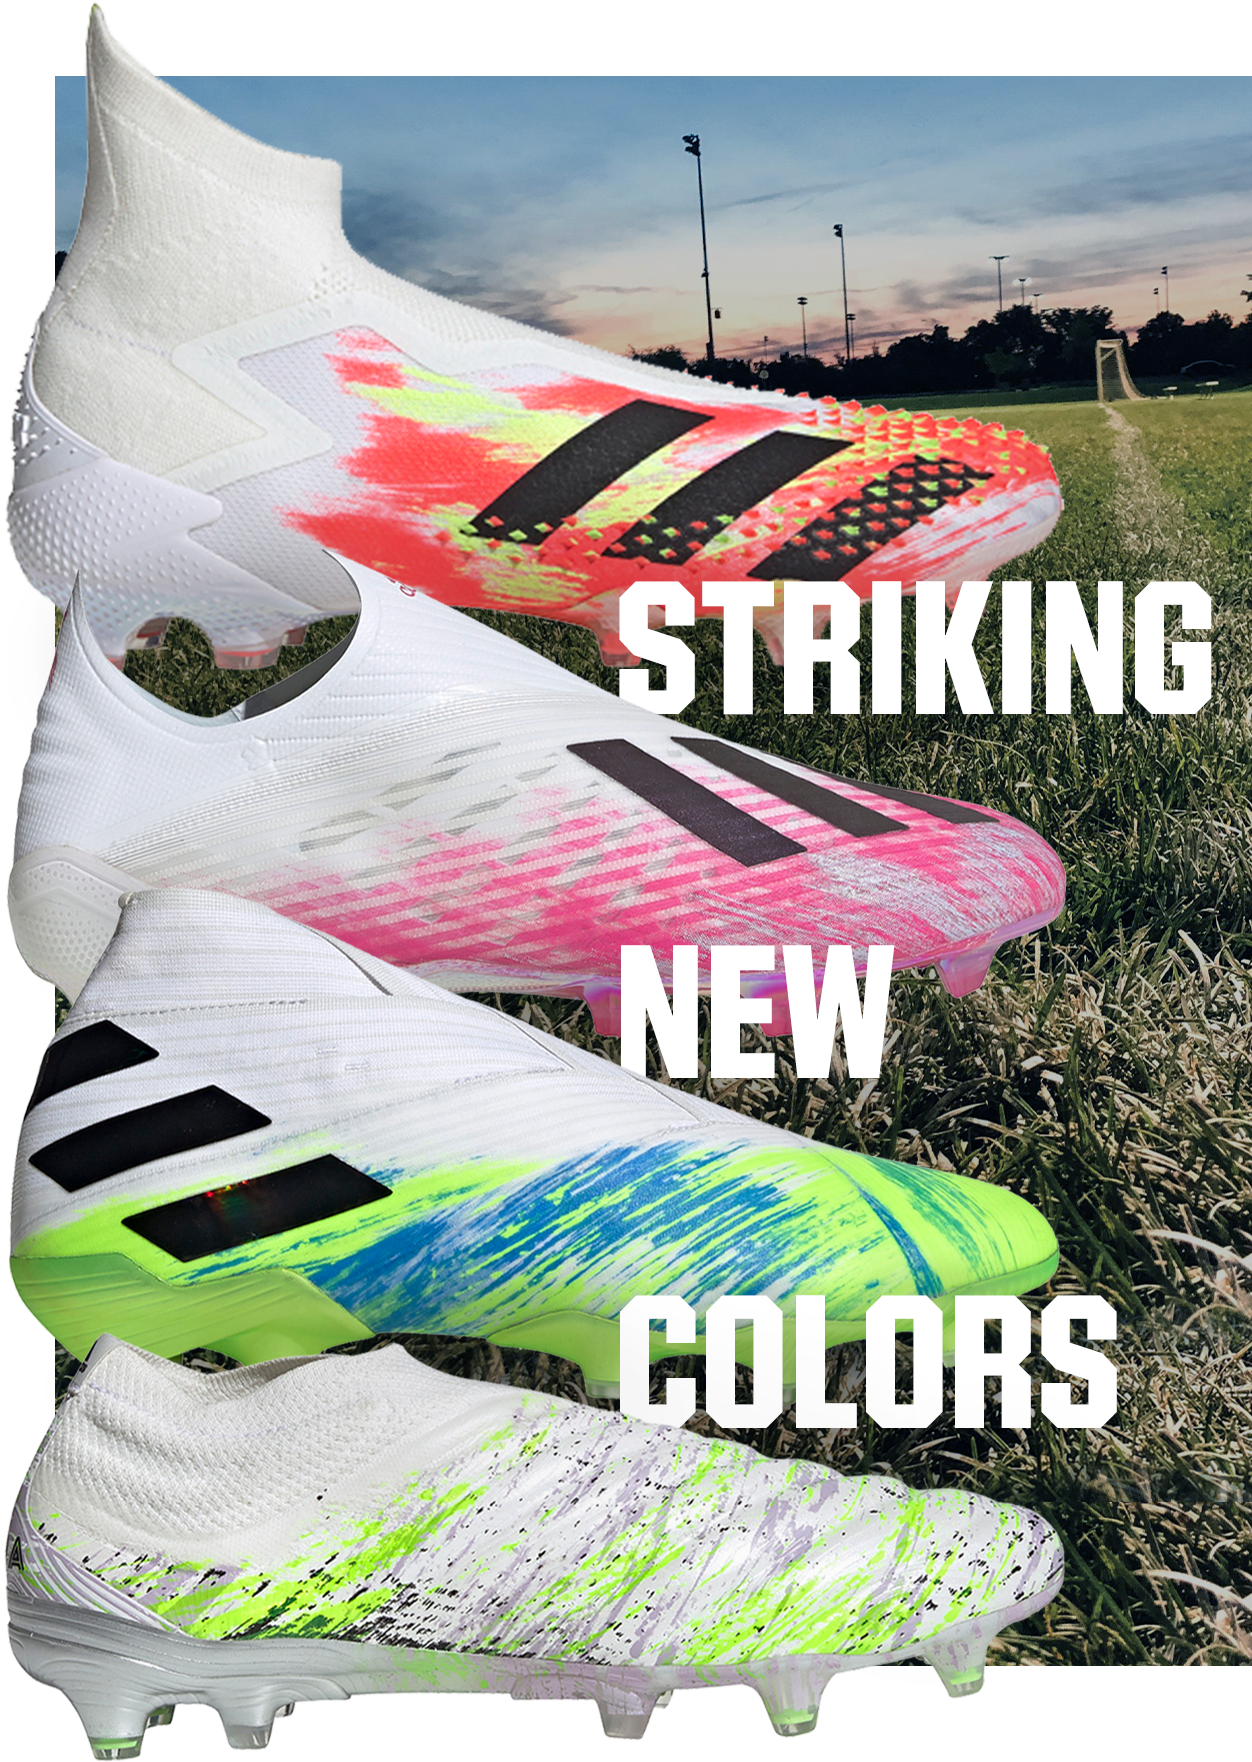 Striking new colors